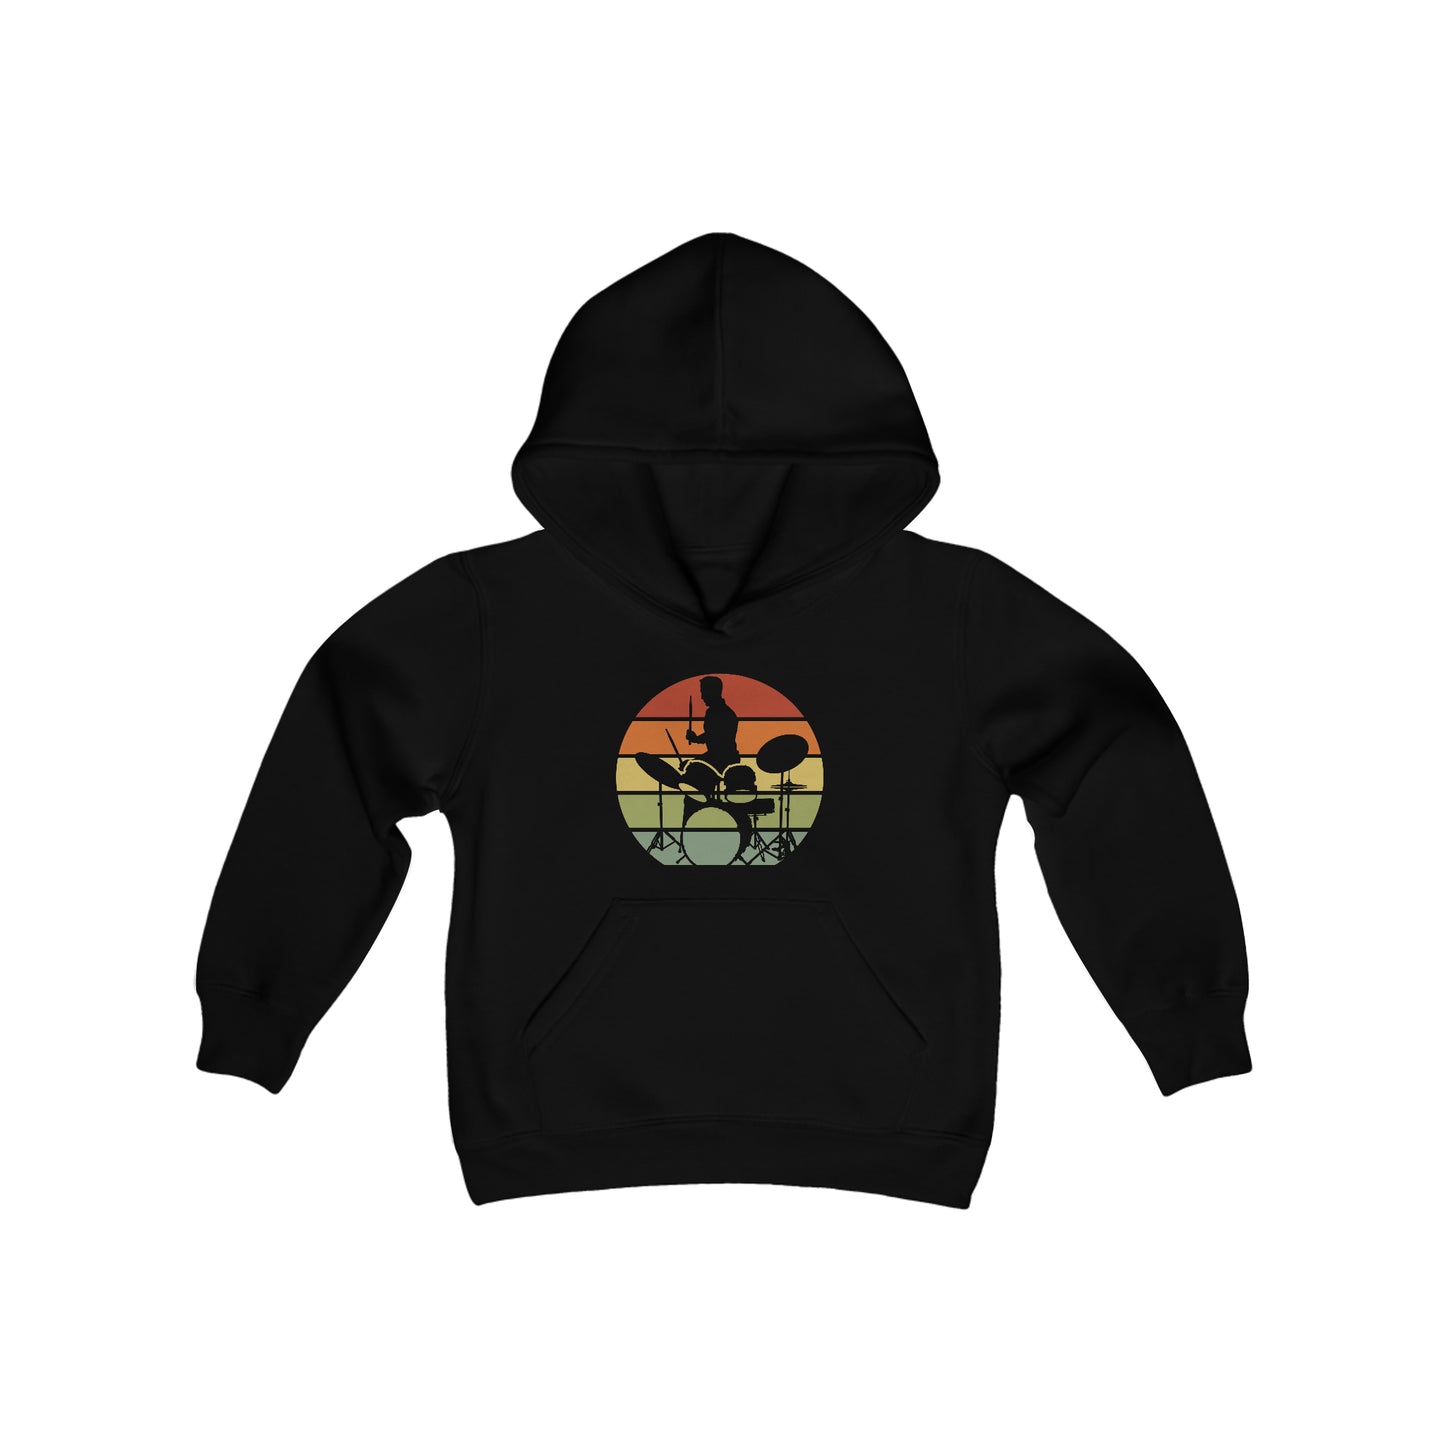 Drummer Silhouette - Retro Circle Stripes Faded - Youth Heavy Blend Hooded Sweatshirt